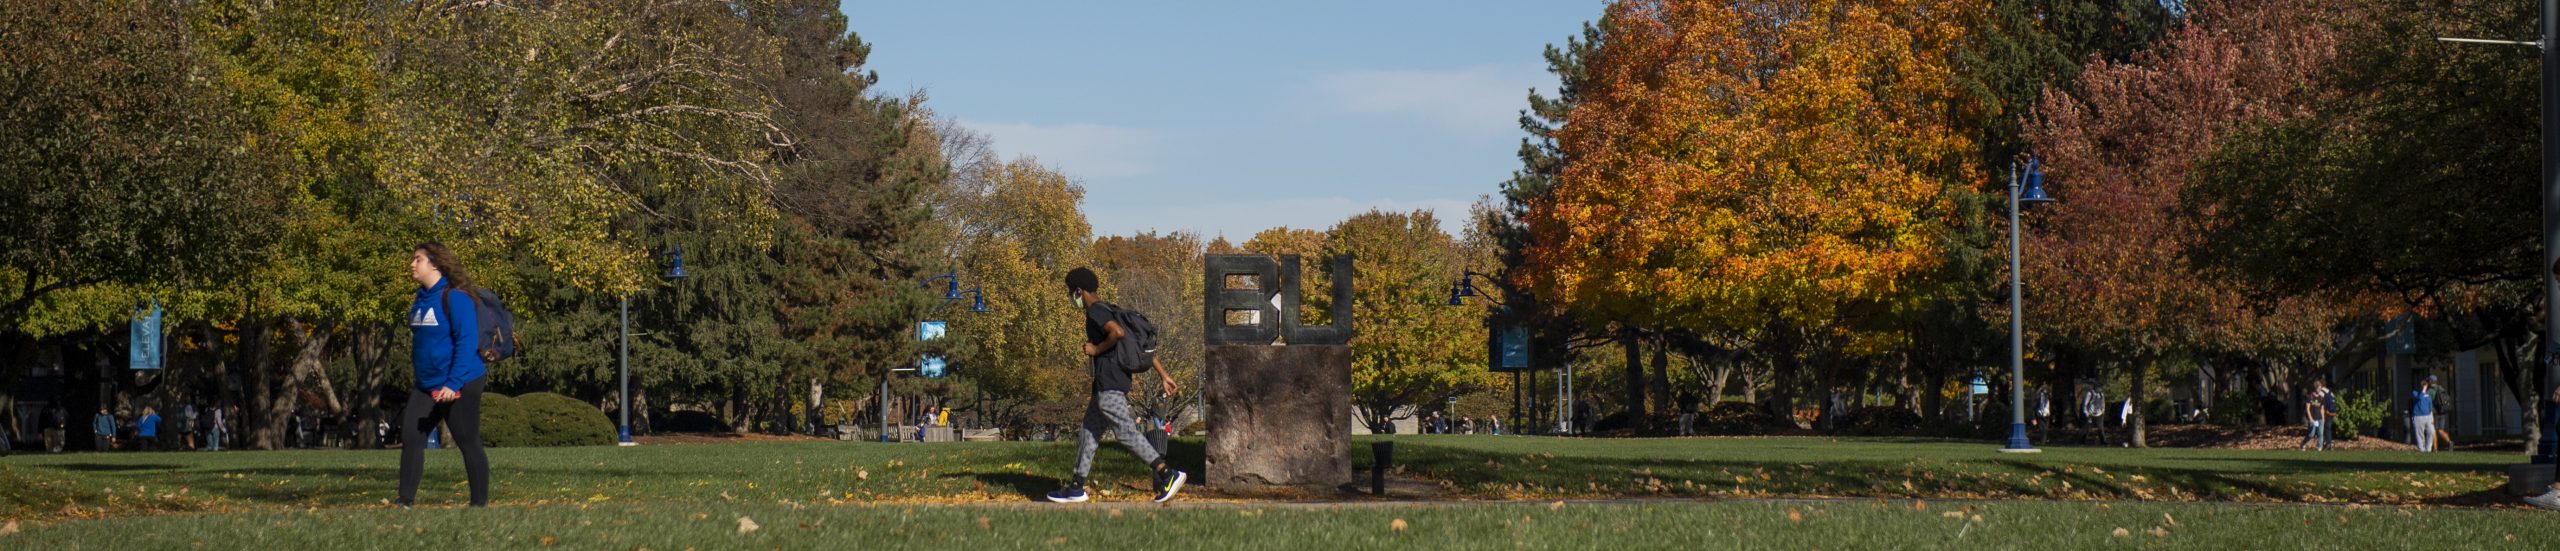 Butler Campus with BU sign and students